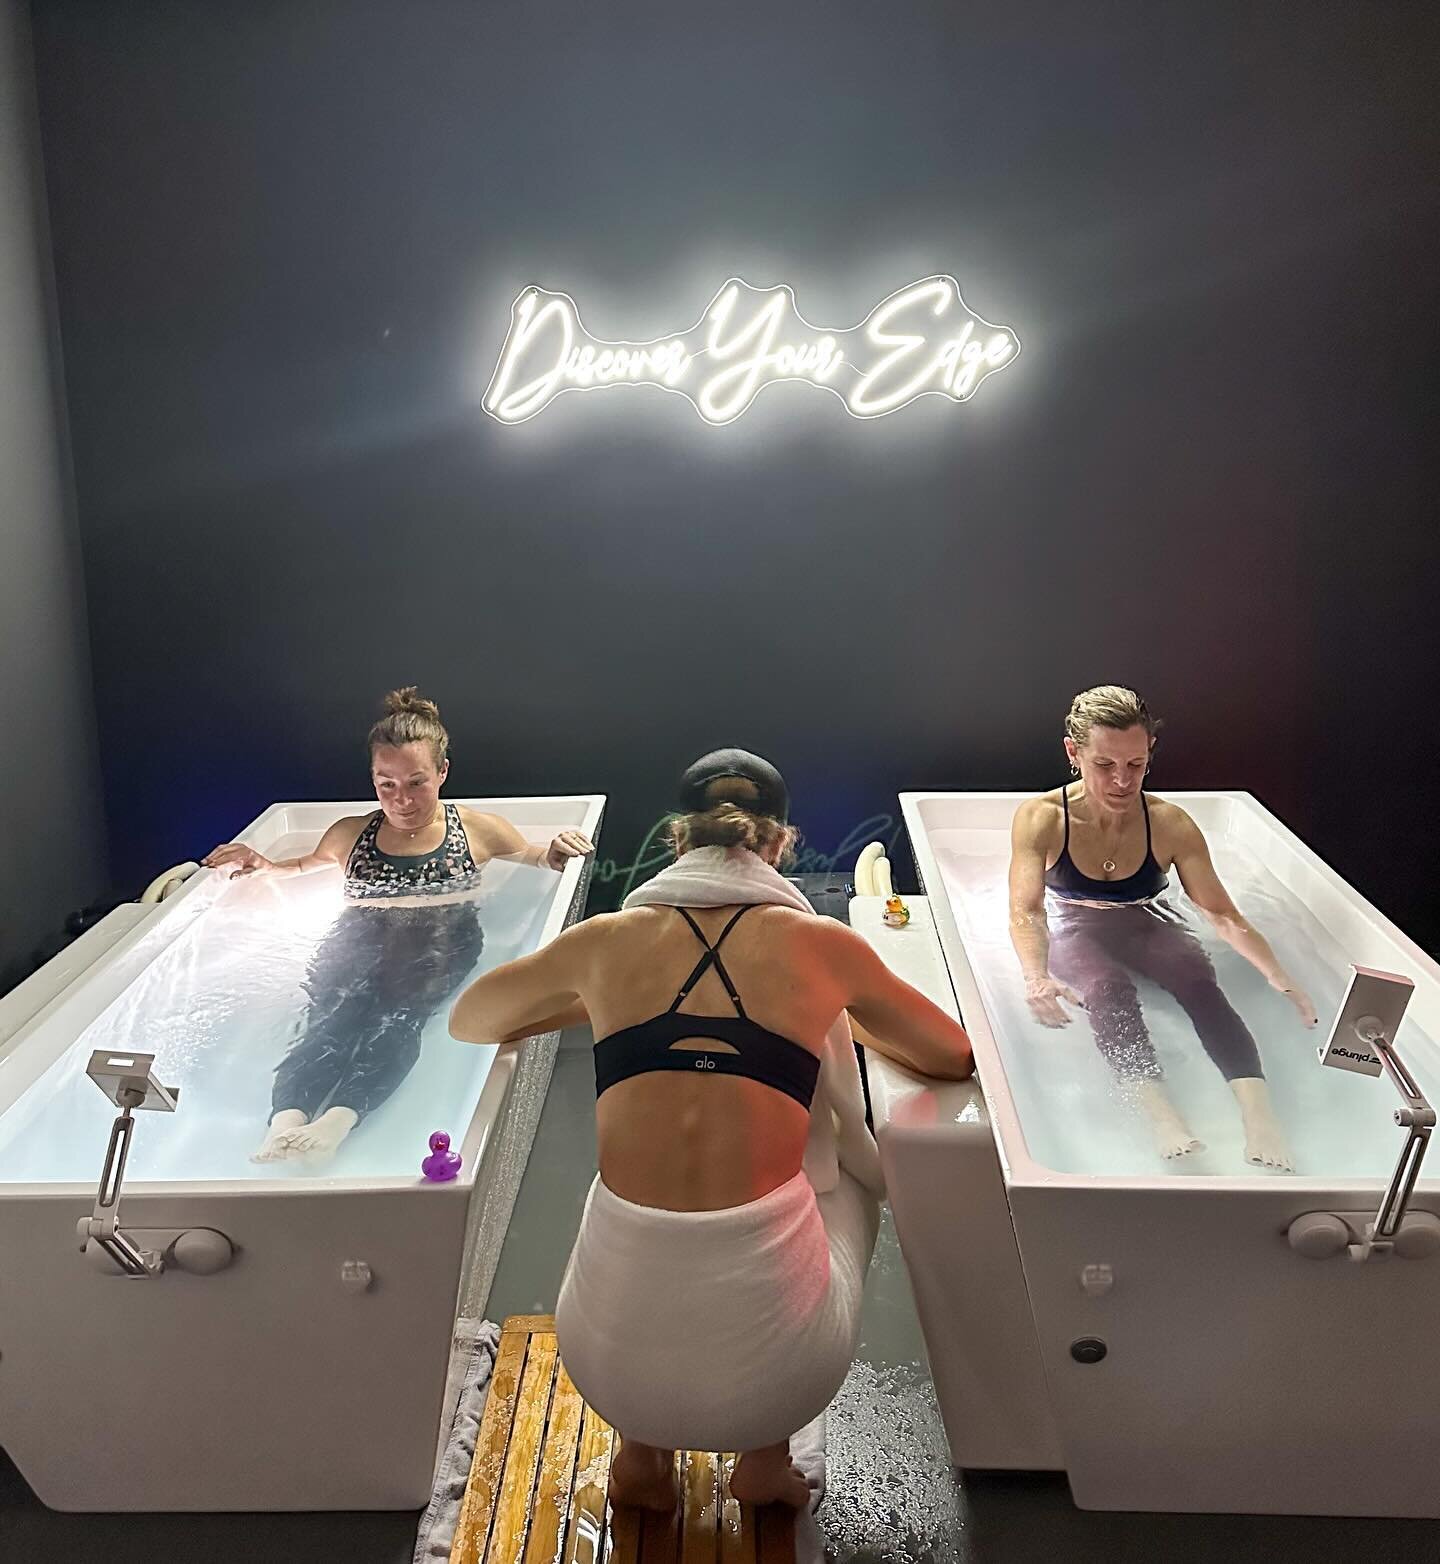 Discover your Edge ⚡️ ⁣
⁣
Not only in our classes&hellip;⁣
But also in our recovery area.⁣
⁣
📸 coach Kat being coach Kat (@_katwyman_ )
⁣